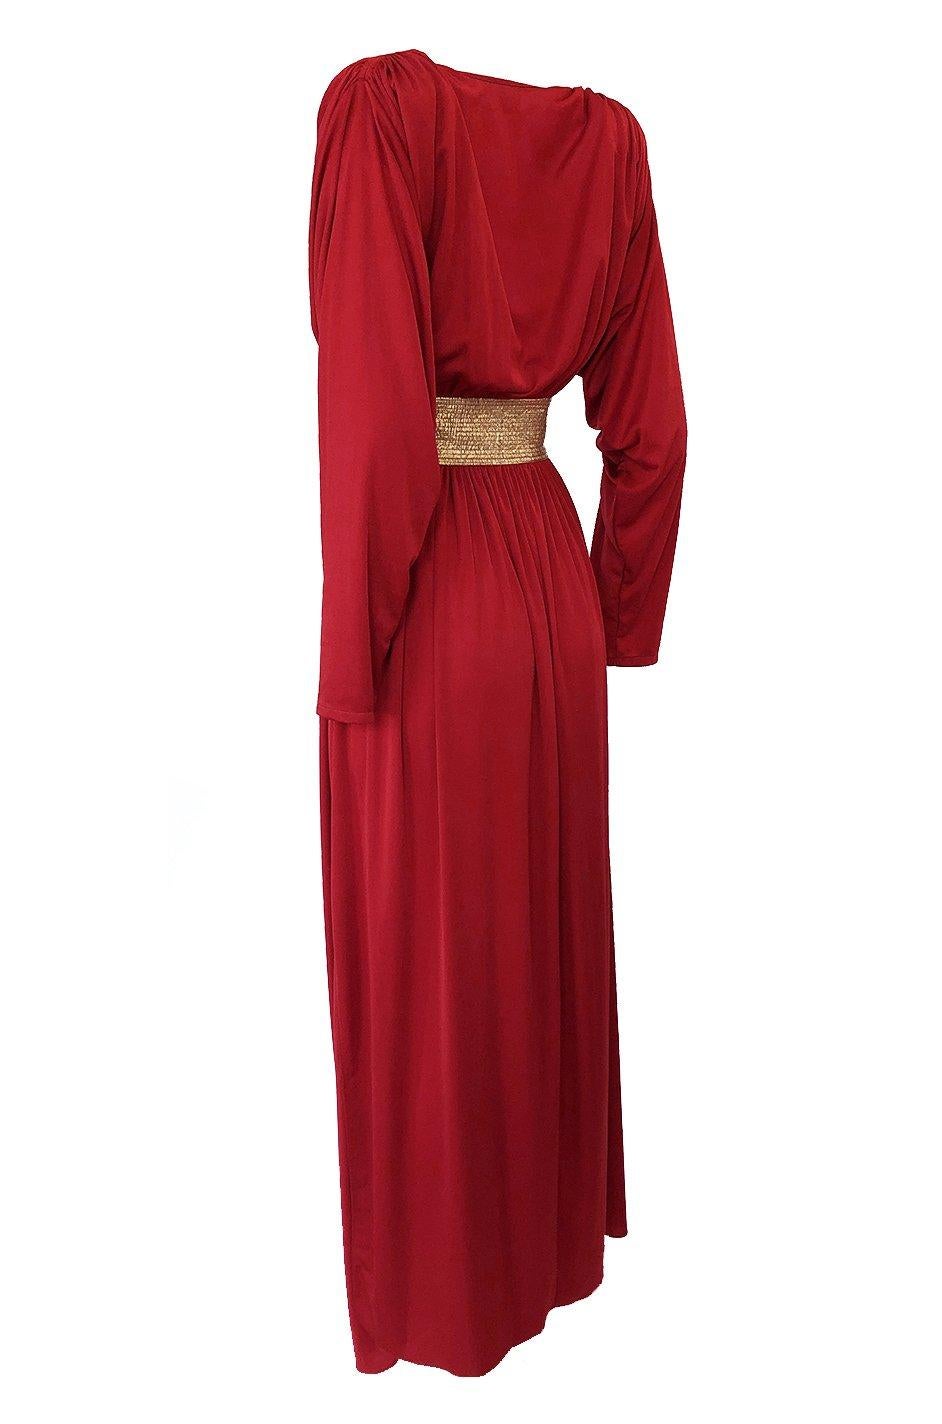 Women's Documented 1980 Bill Tice Plunging Front Red Jersey & Gold Belt Dress